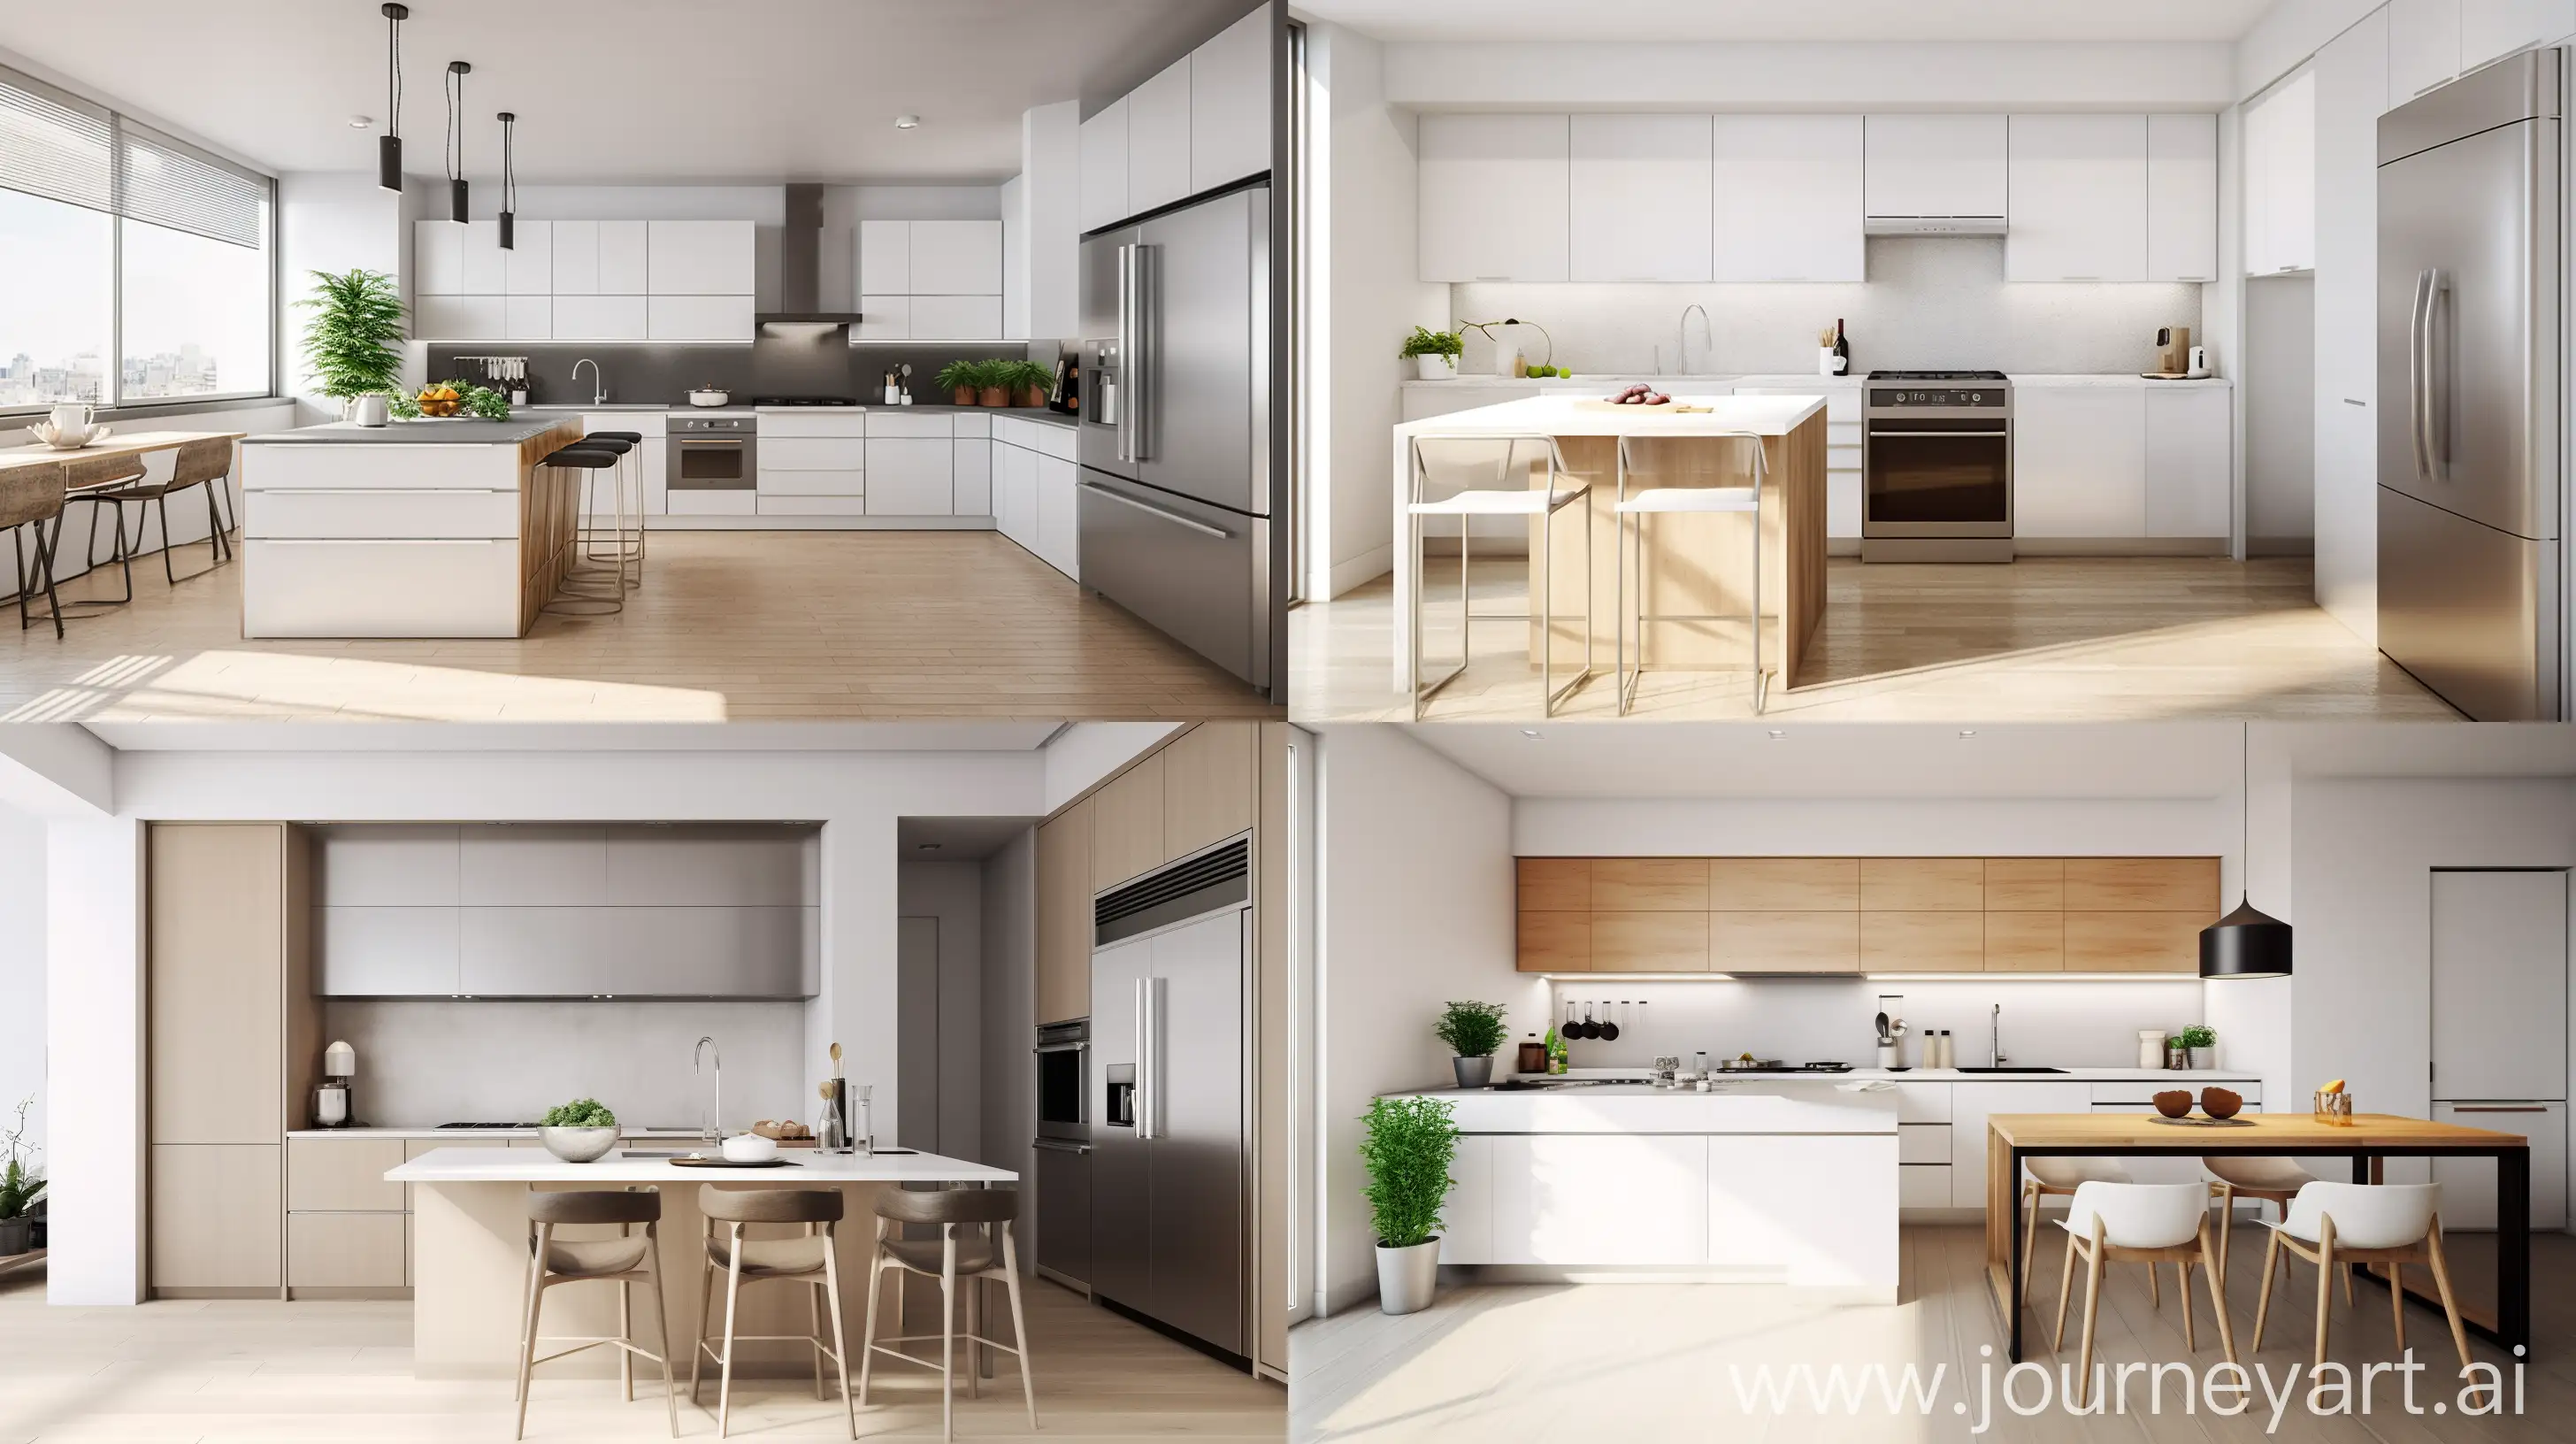 Modern-Minimalist-Kitchen-Design-with-Sustainable-Features-and-Strategic-Lighting